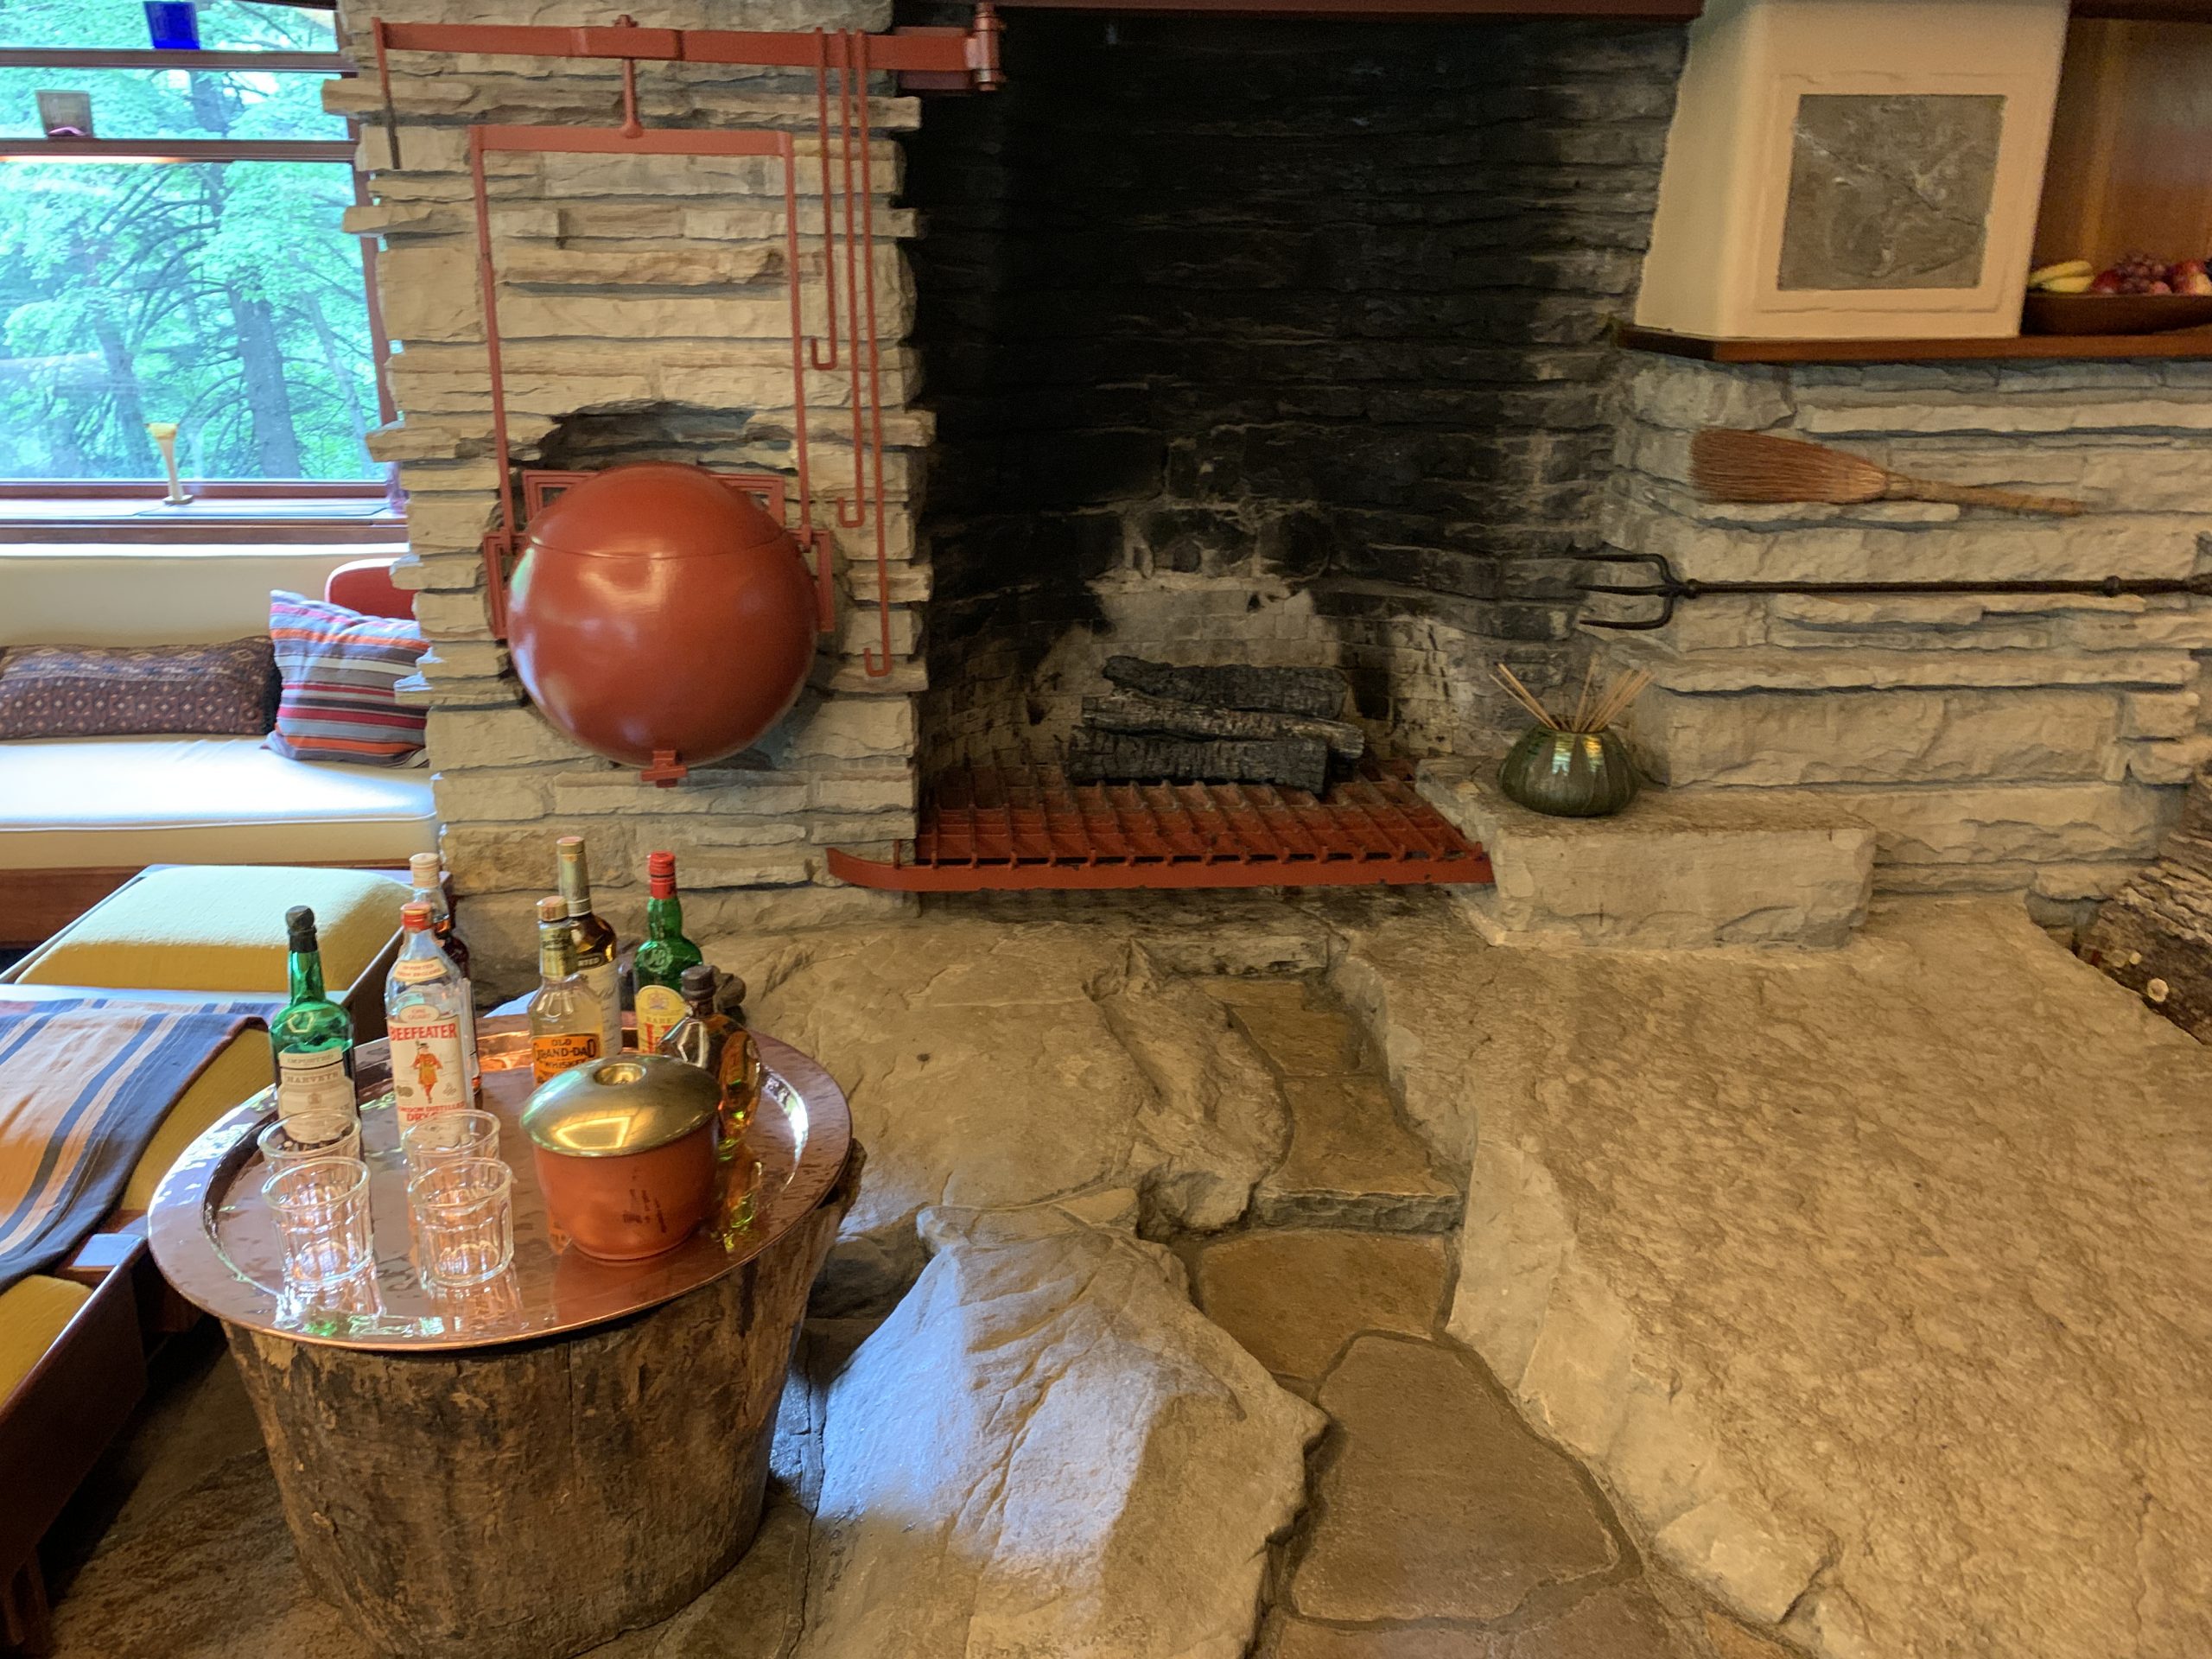 The stone hearth at Fallingwaters, Frank Lloyd Wright designed house in Pennsylvania